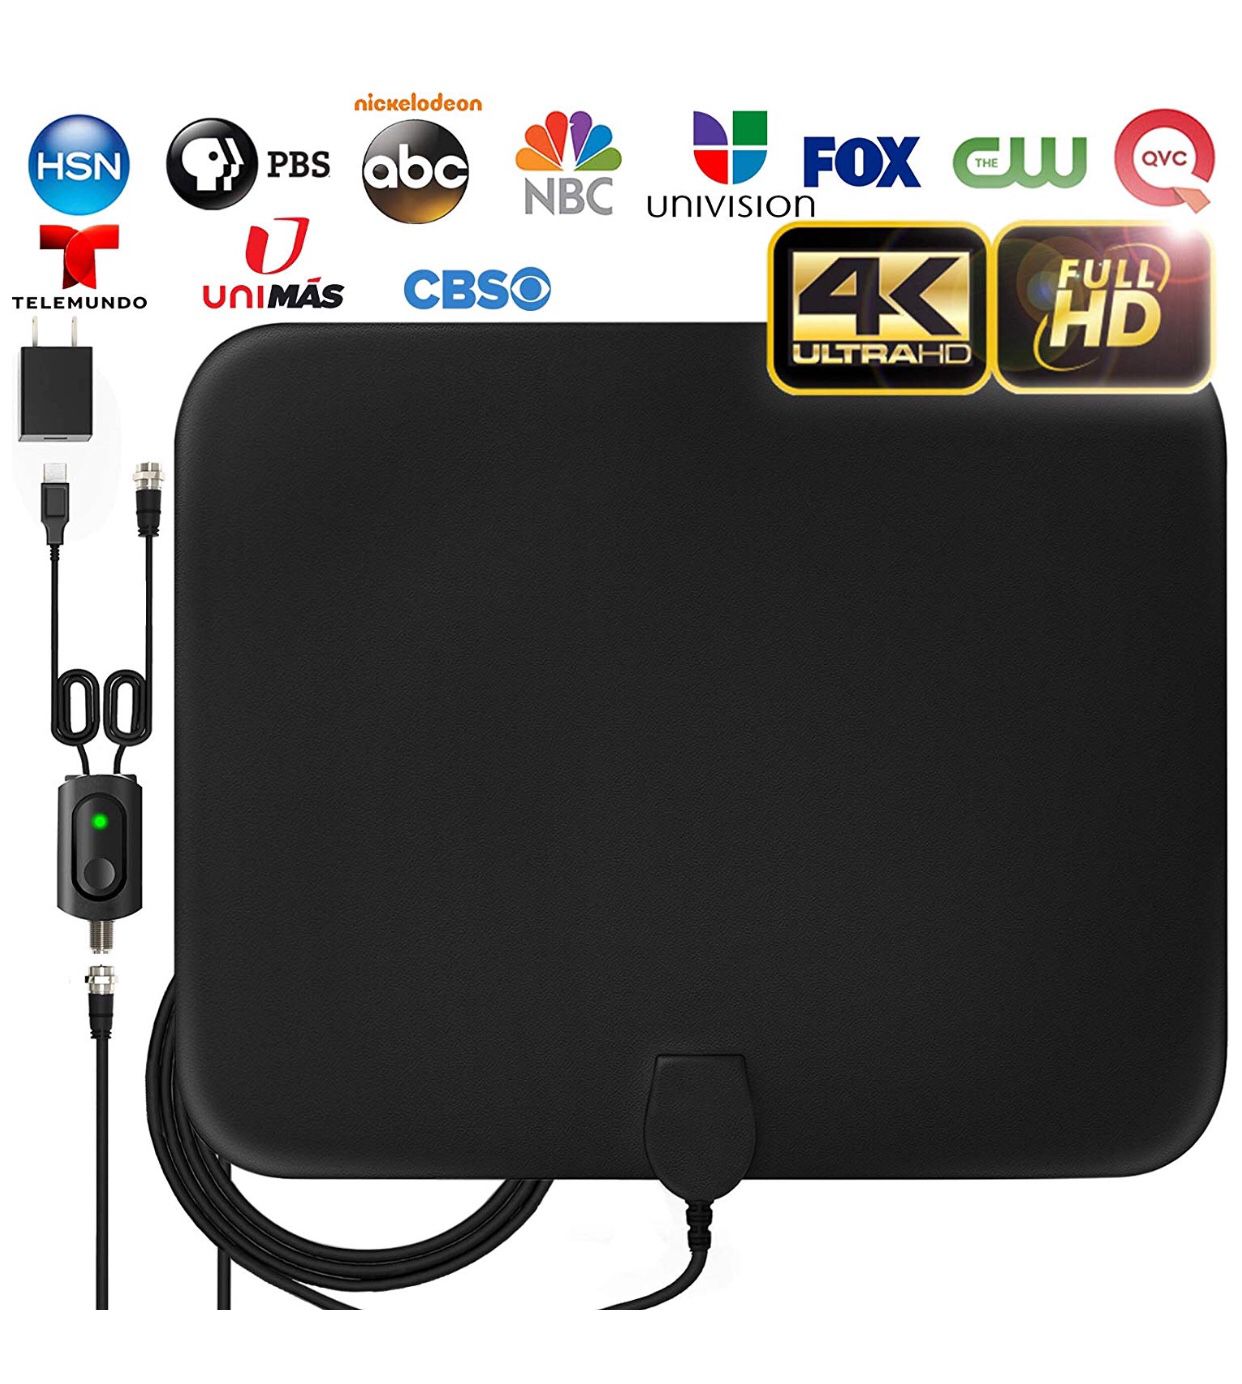 Amplified HD Digital TV Antenna Long 120 Miles Range - Support 4K 1080p Fire tv Stick and All Older